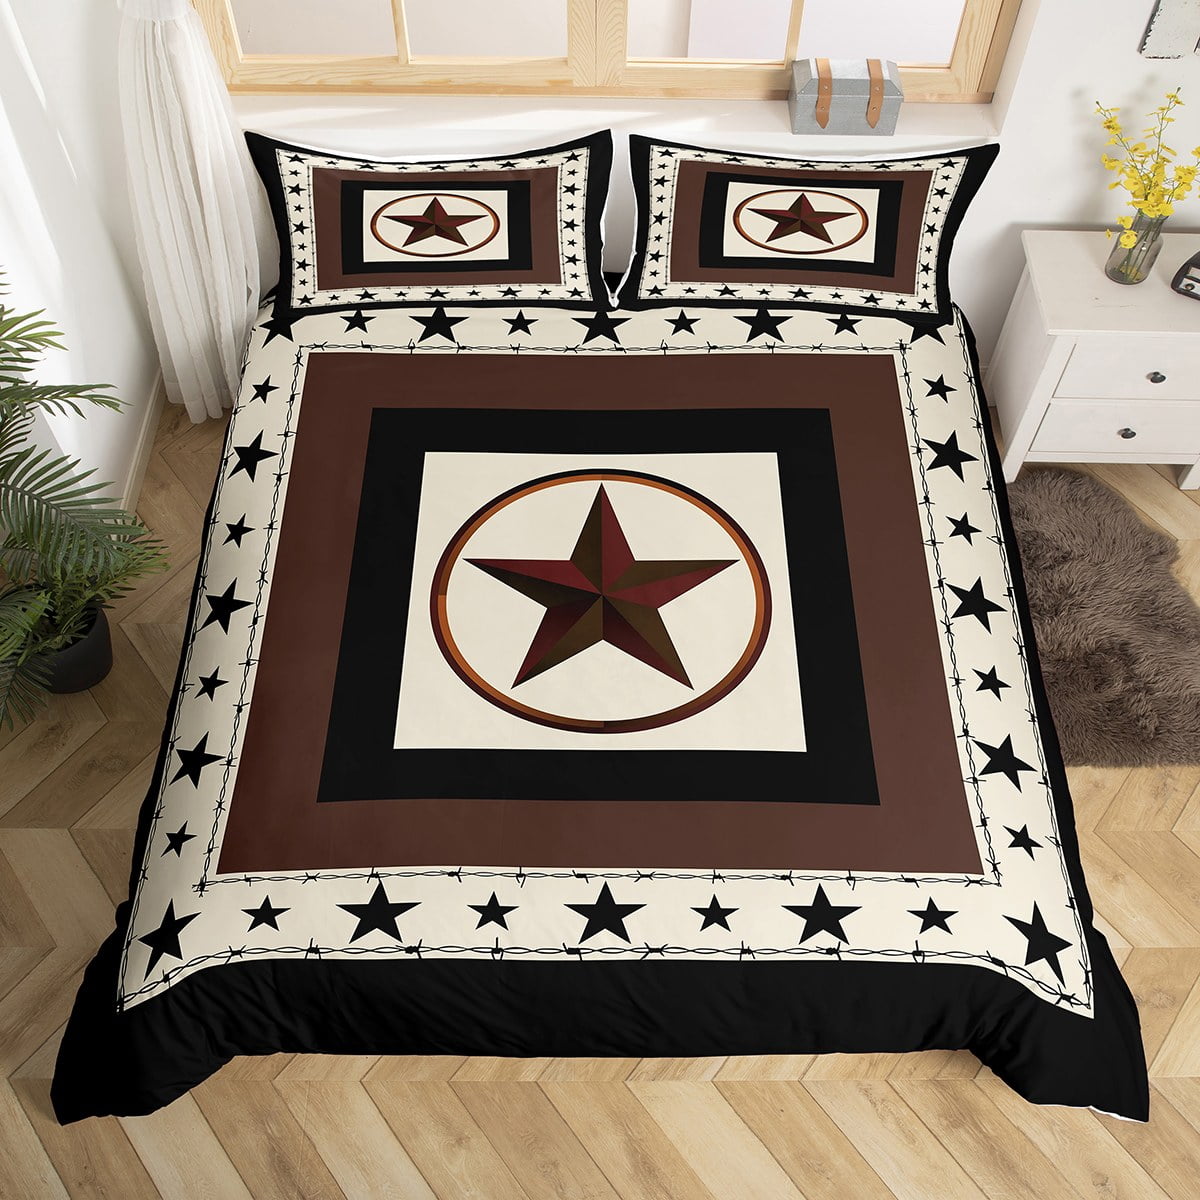 Western Texas Star Comforter Cover Exotic Nordic Style Duvet Cover ...